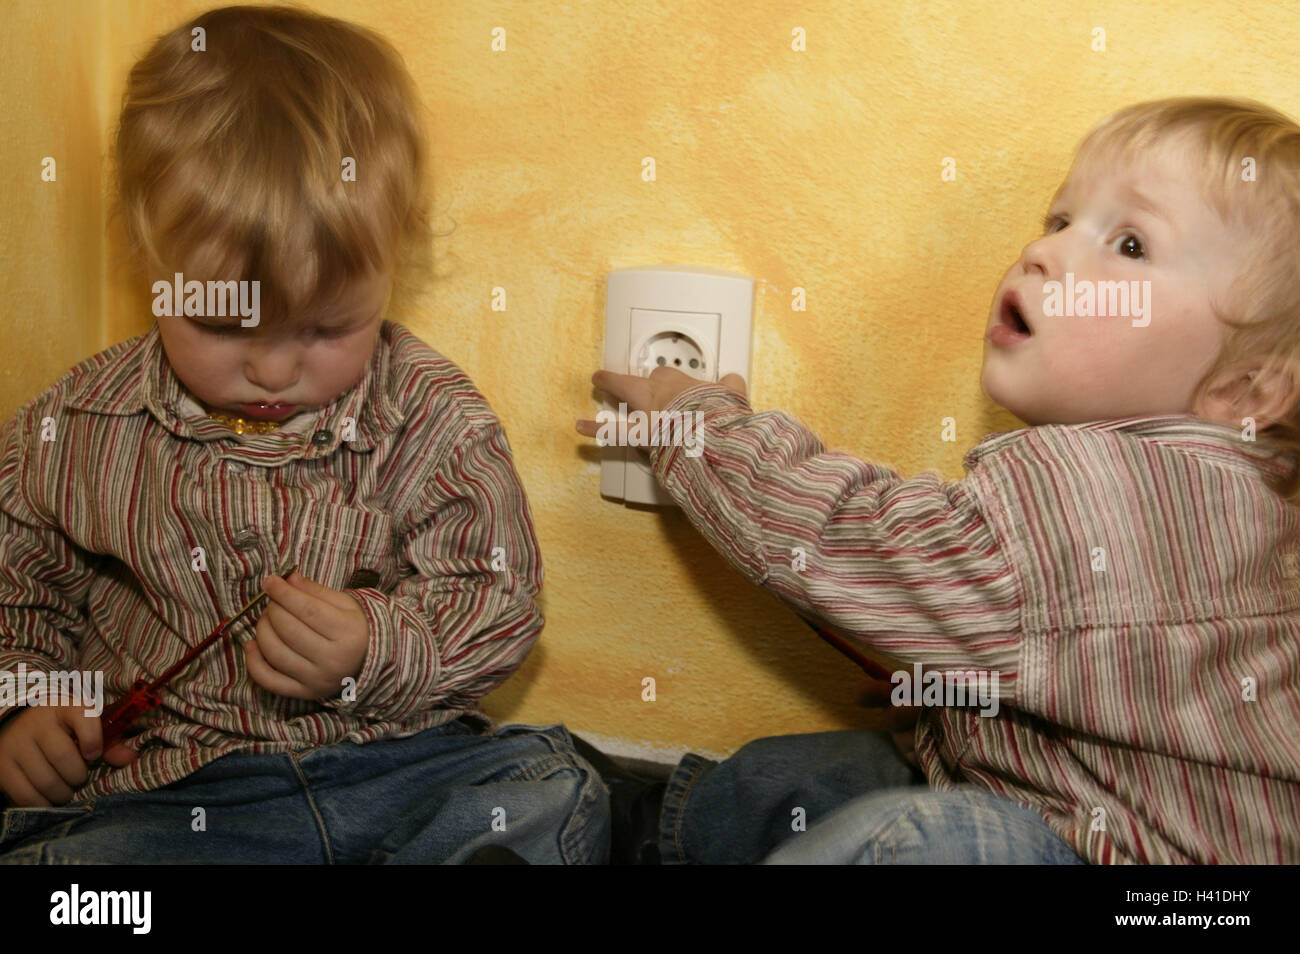 Infants, play, screwdrivers, socket, mortal danger danger, accident, danger collision, tools, current, shunt, activity, experiment, electric shock, backup, care, household, obligatory supervision, unattended, children, boys, twins, two, 1 - 2 years, floor Stock Photo